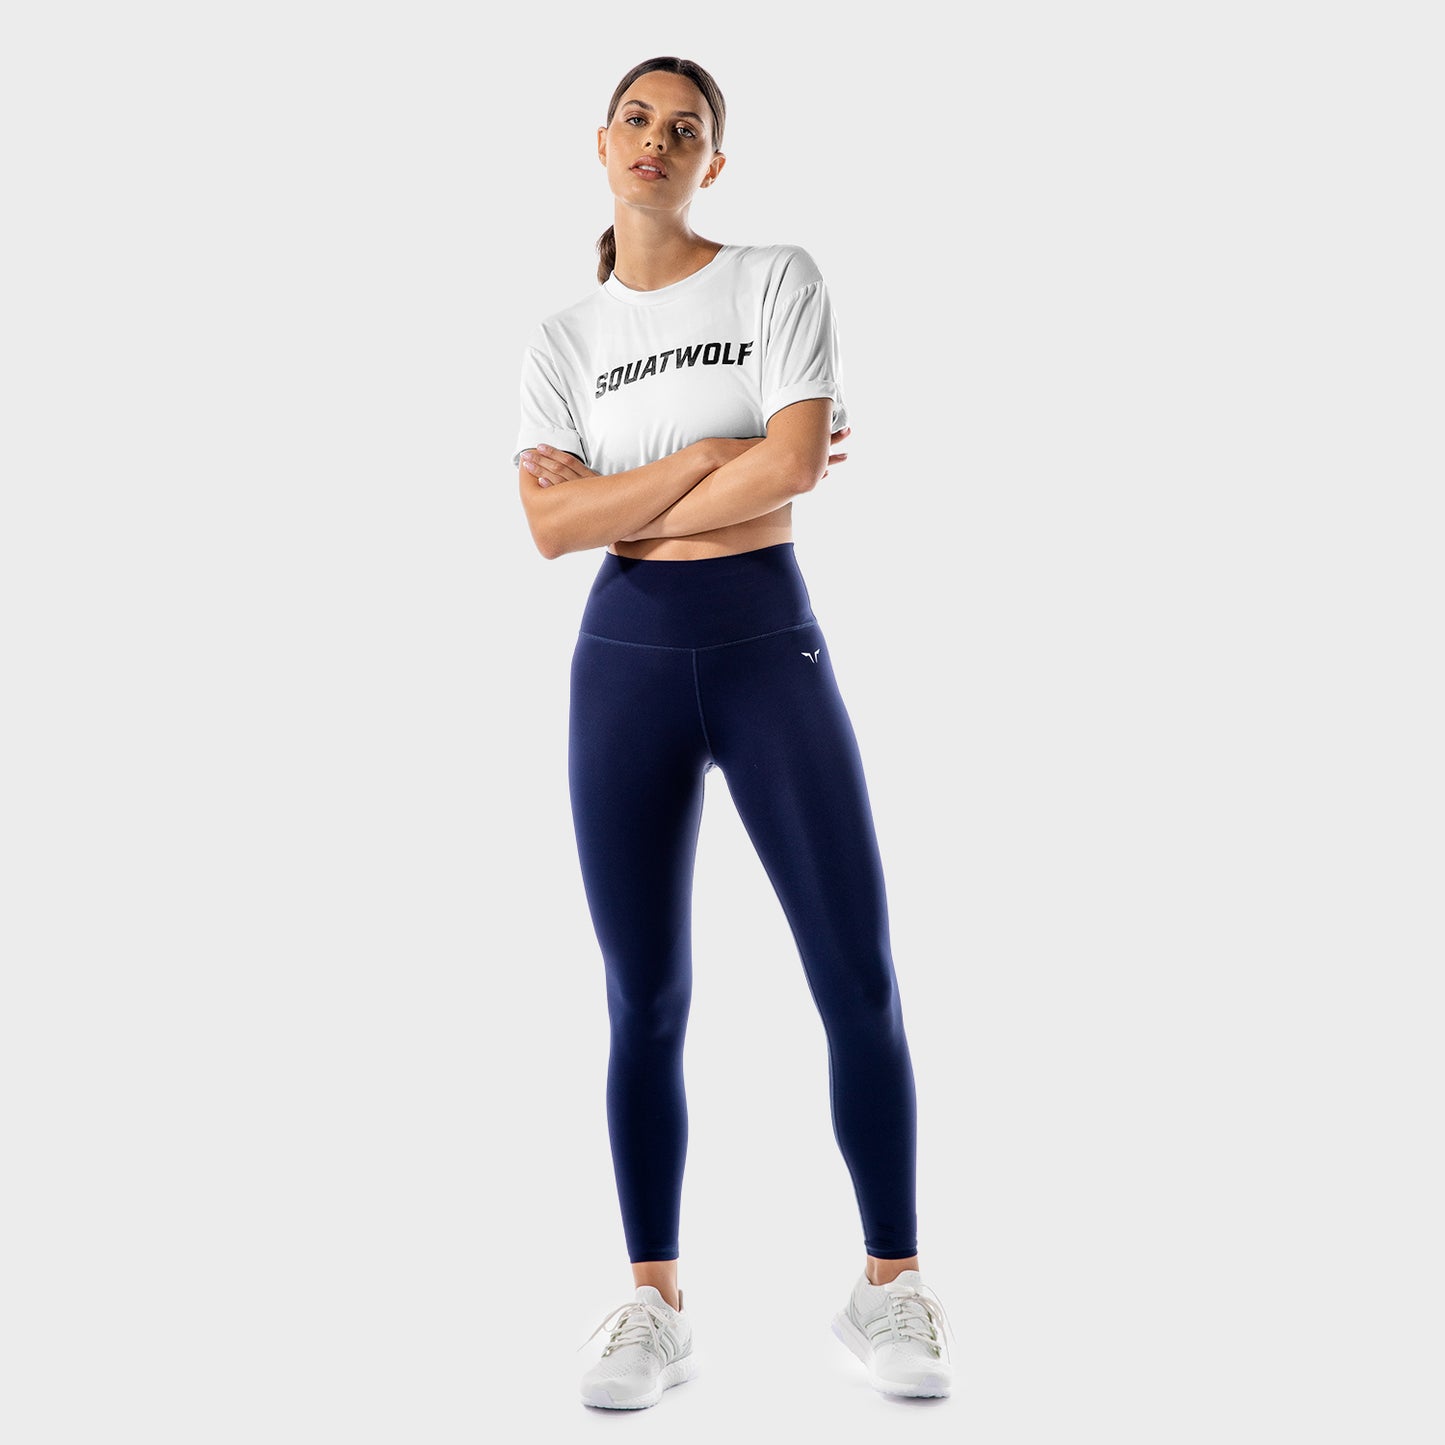 squatwolf-gym-t-shirts-for-women-iconic-crop-tee-white-workout-clothes